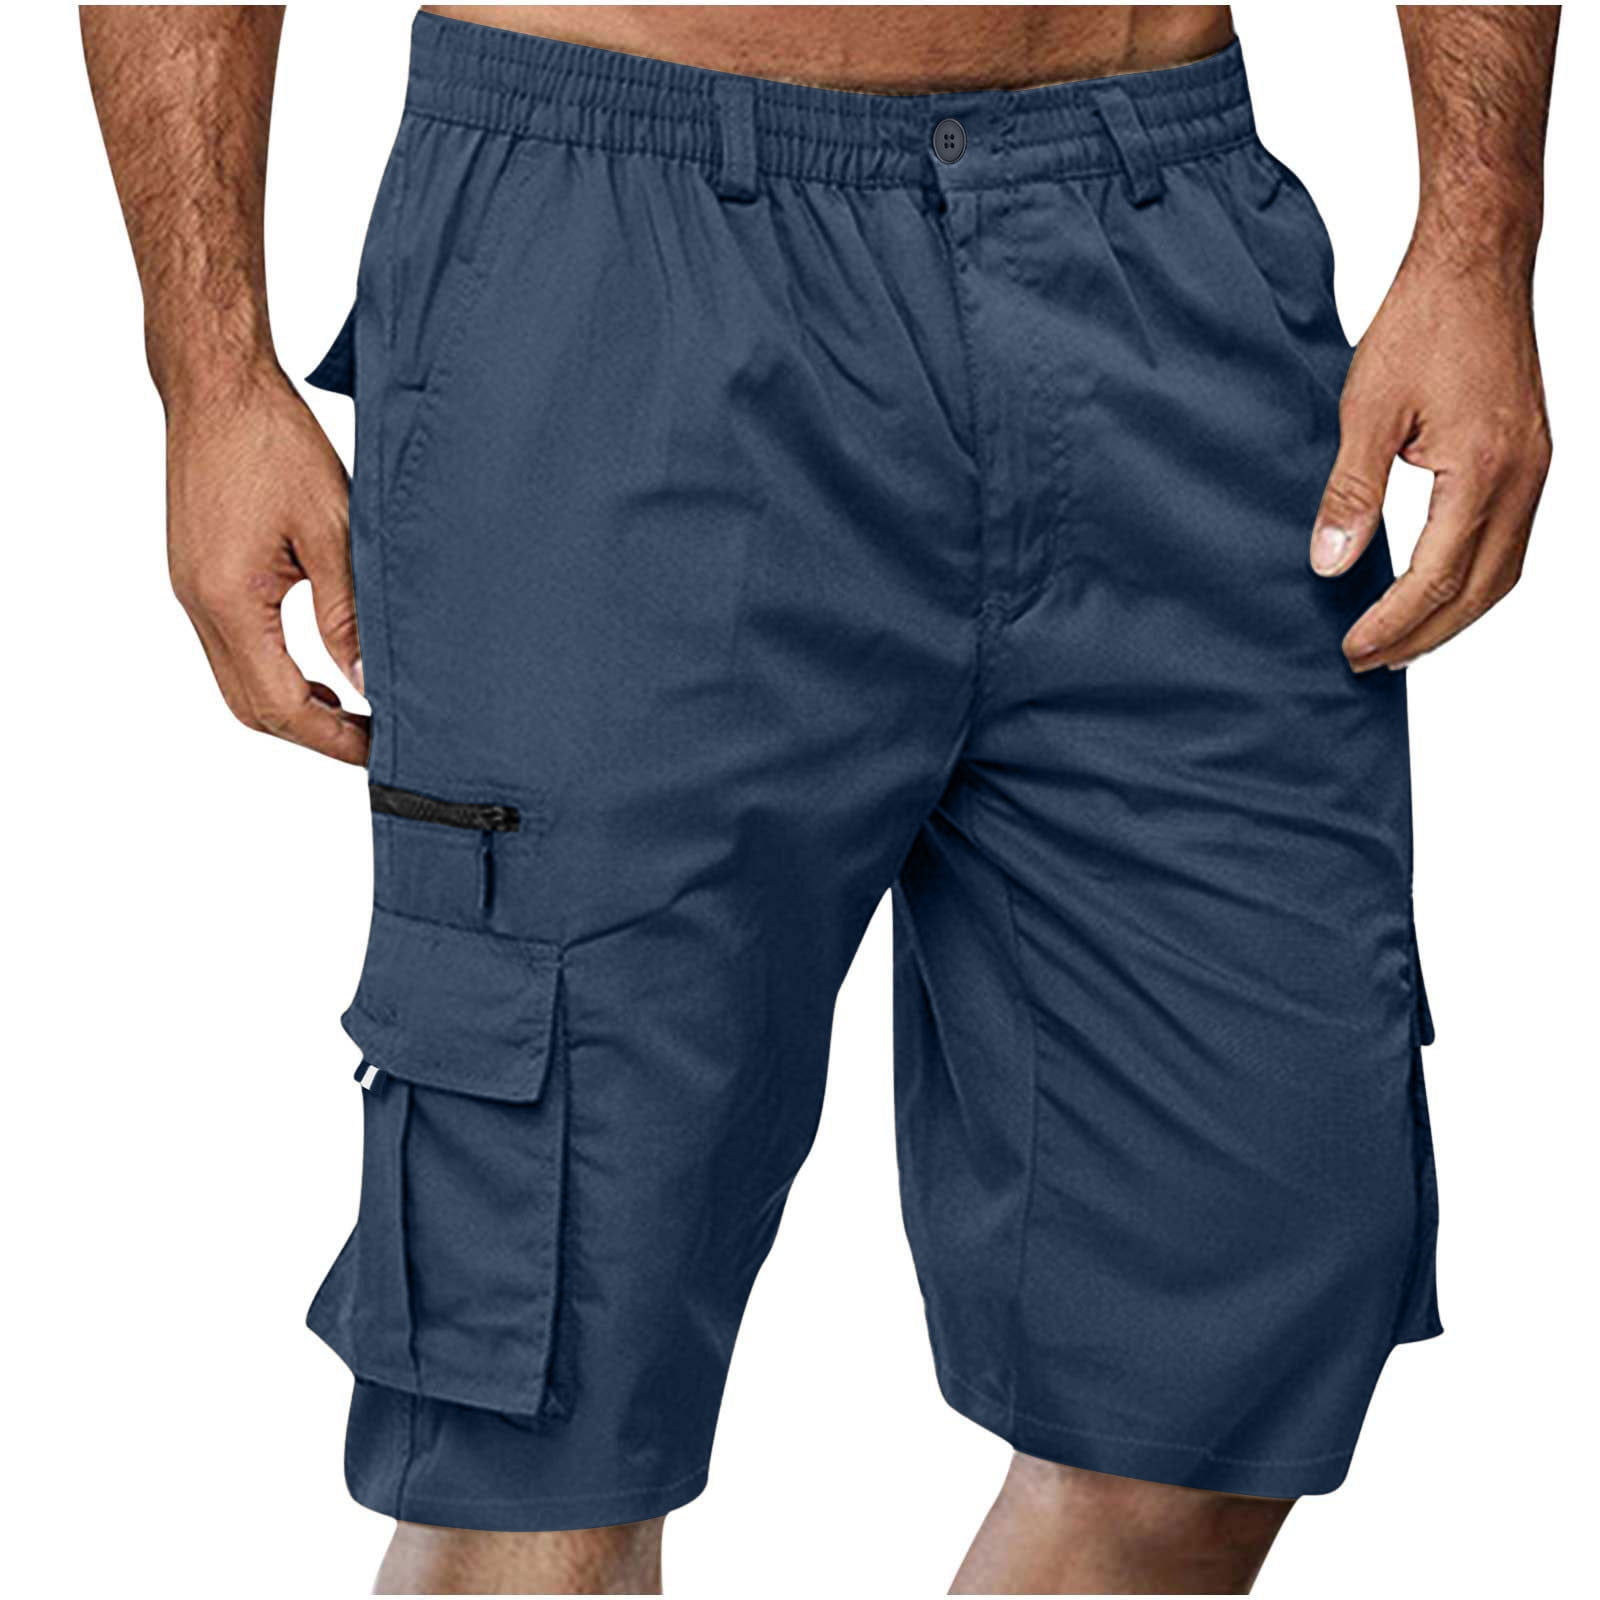 CaComMARK PI Men's Shorts Clearance Men Casual Solid Color Knee Length ...